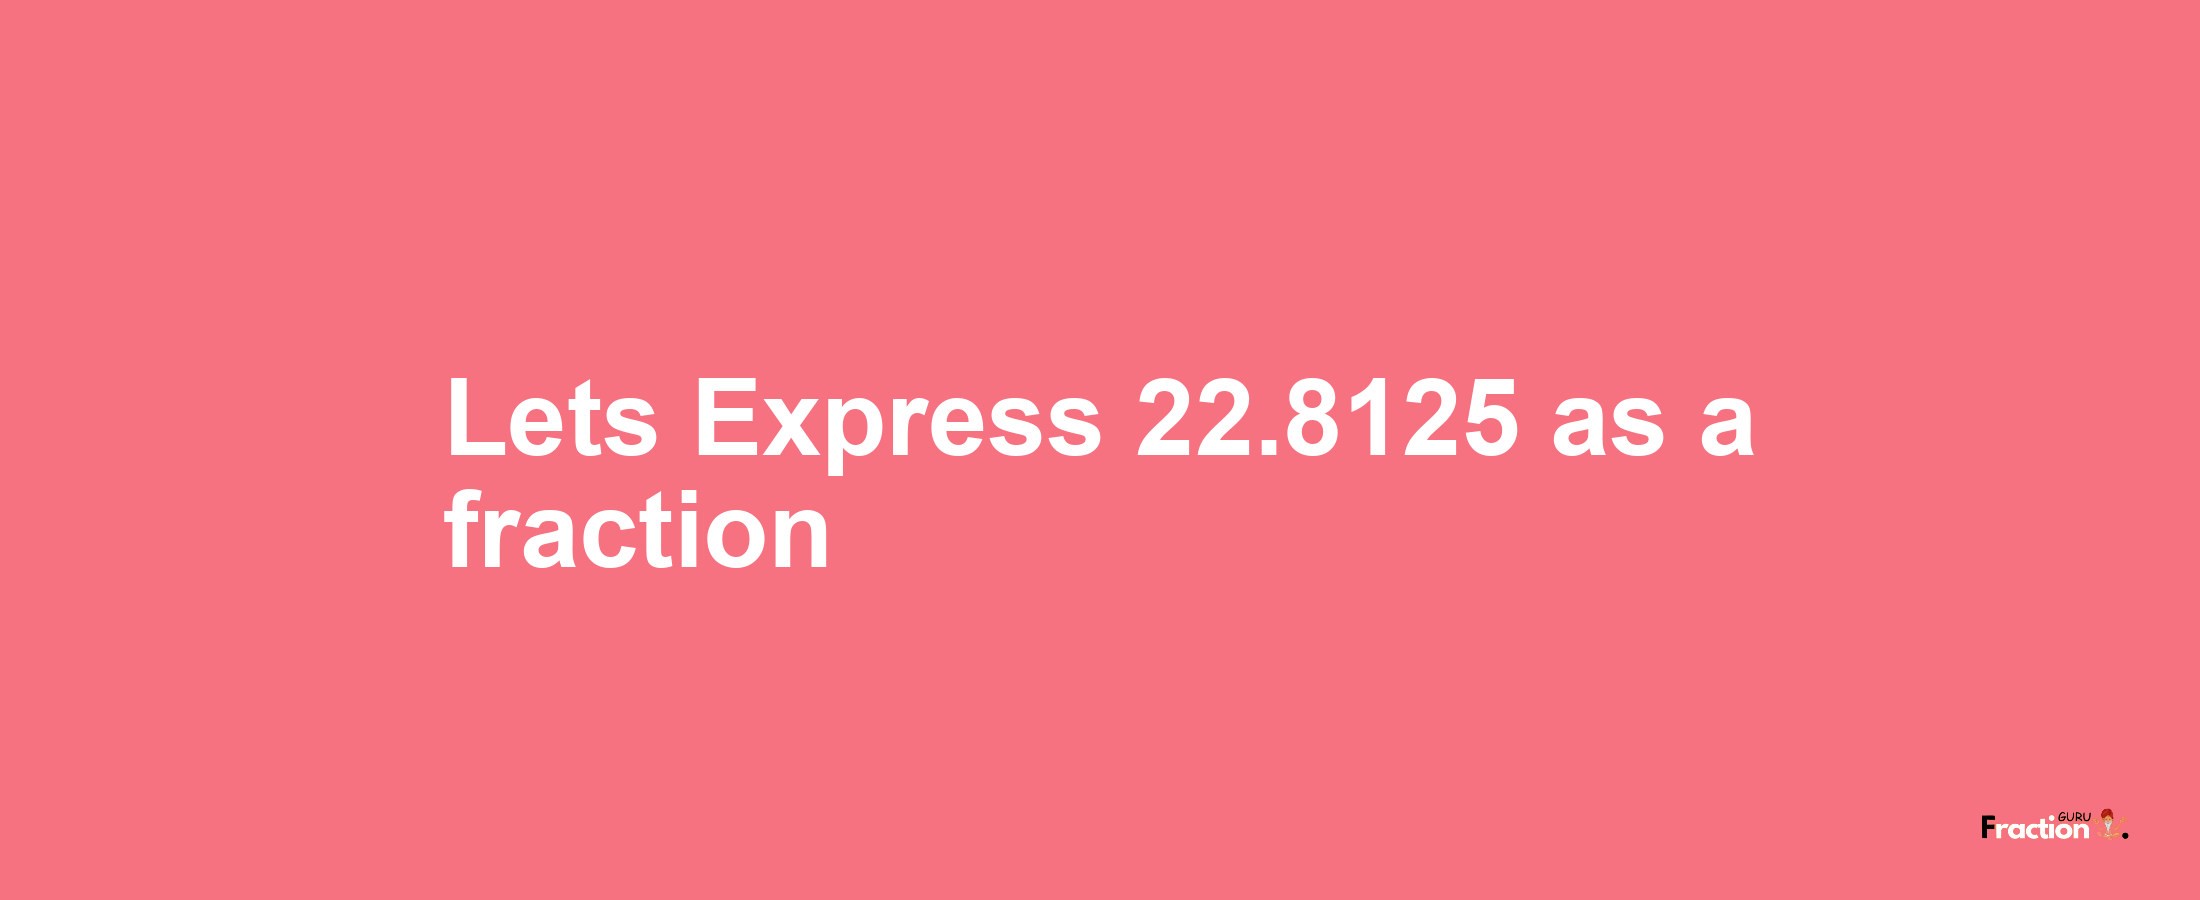 Lets Express 22.8125 as afraction